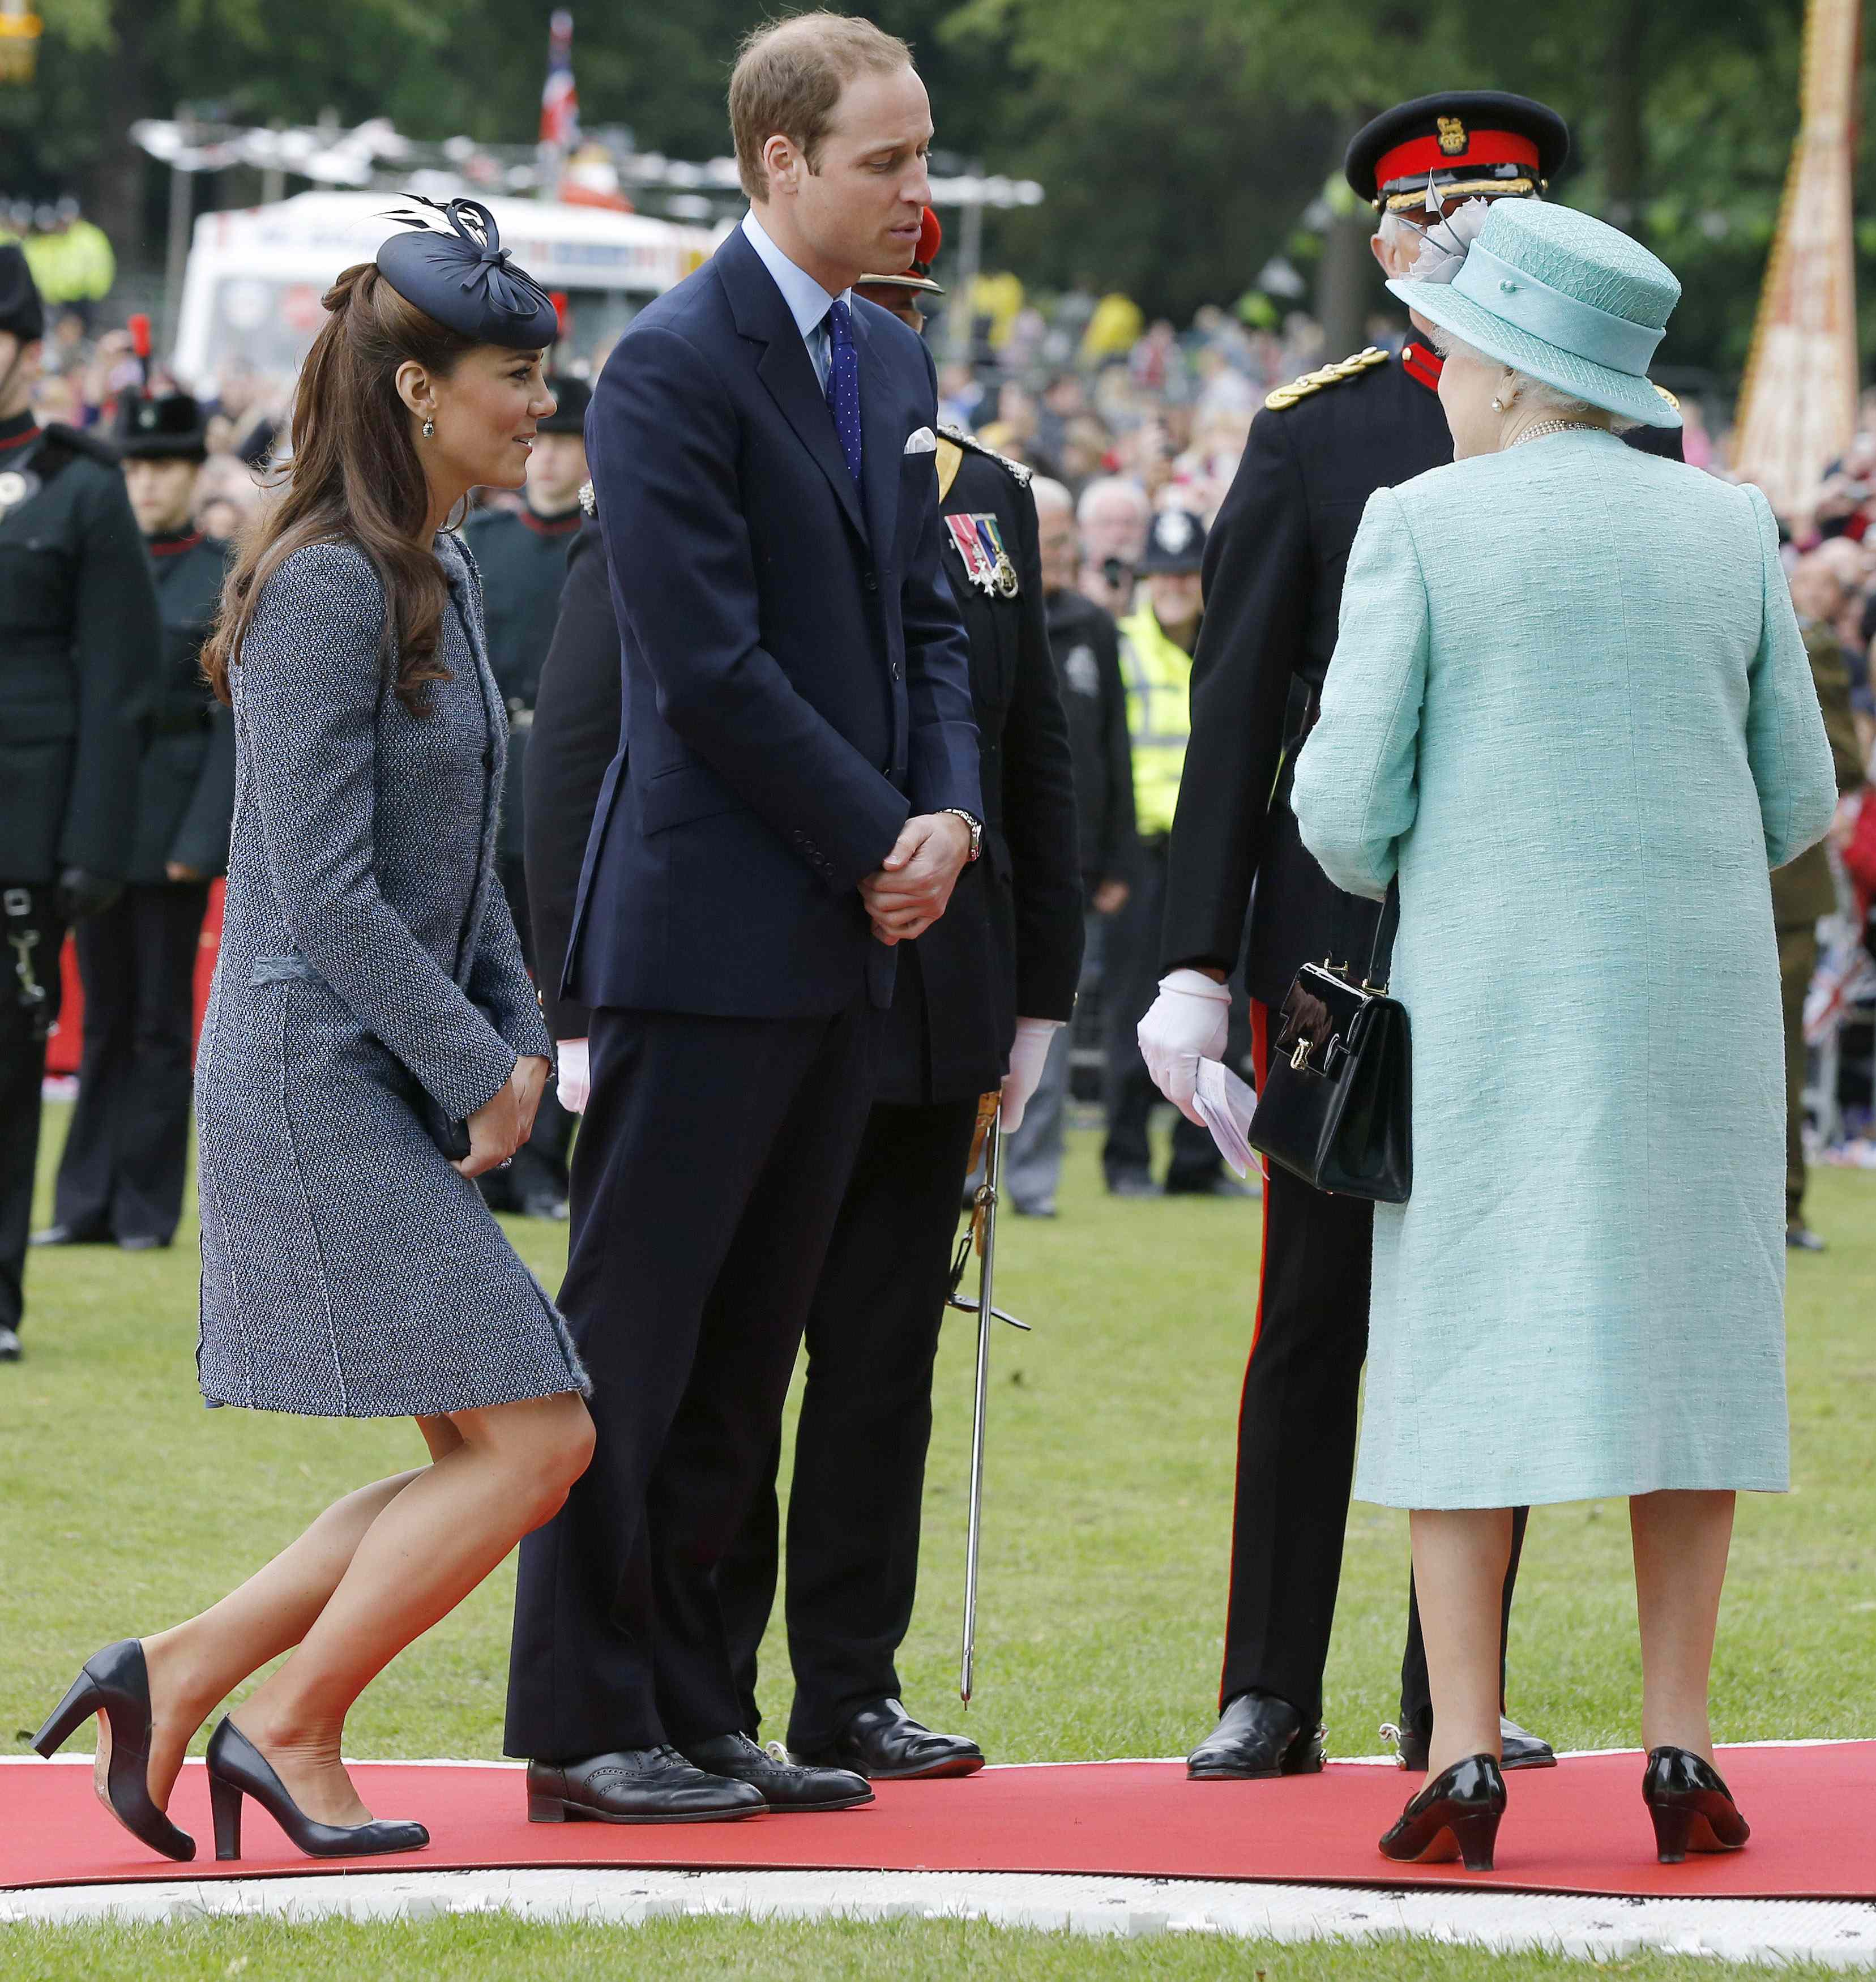 Who Does Kate Middleton Have to Curtsy To? Royal Family Etiquette Rules the Duchess Must Always Follow